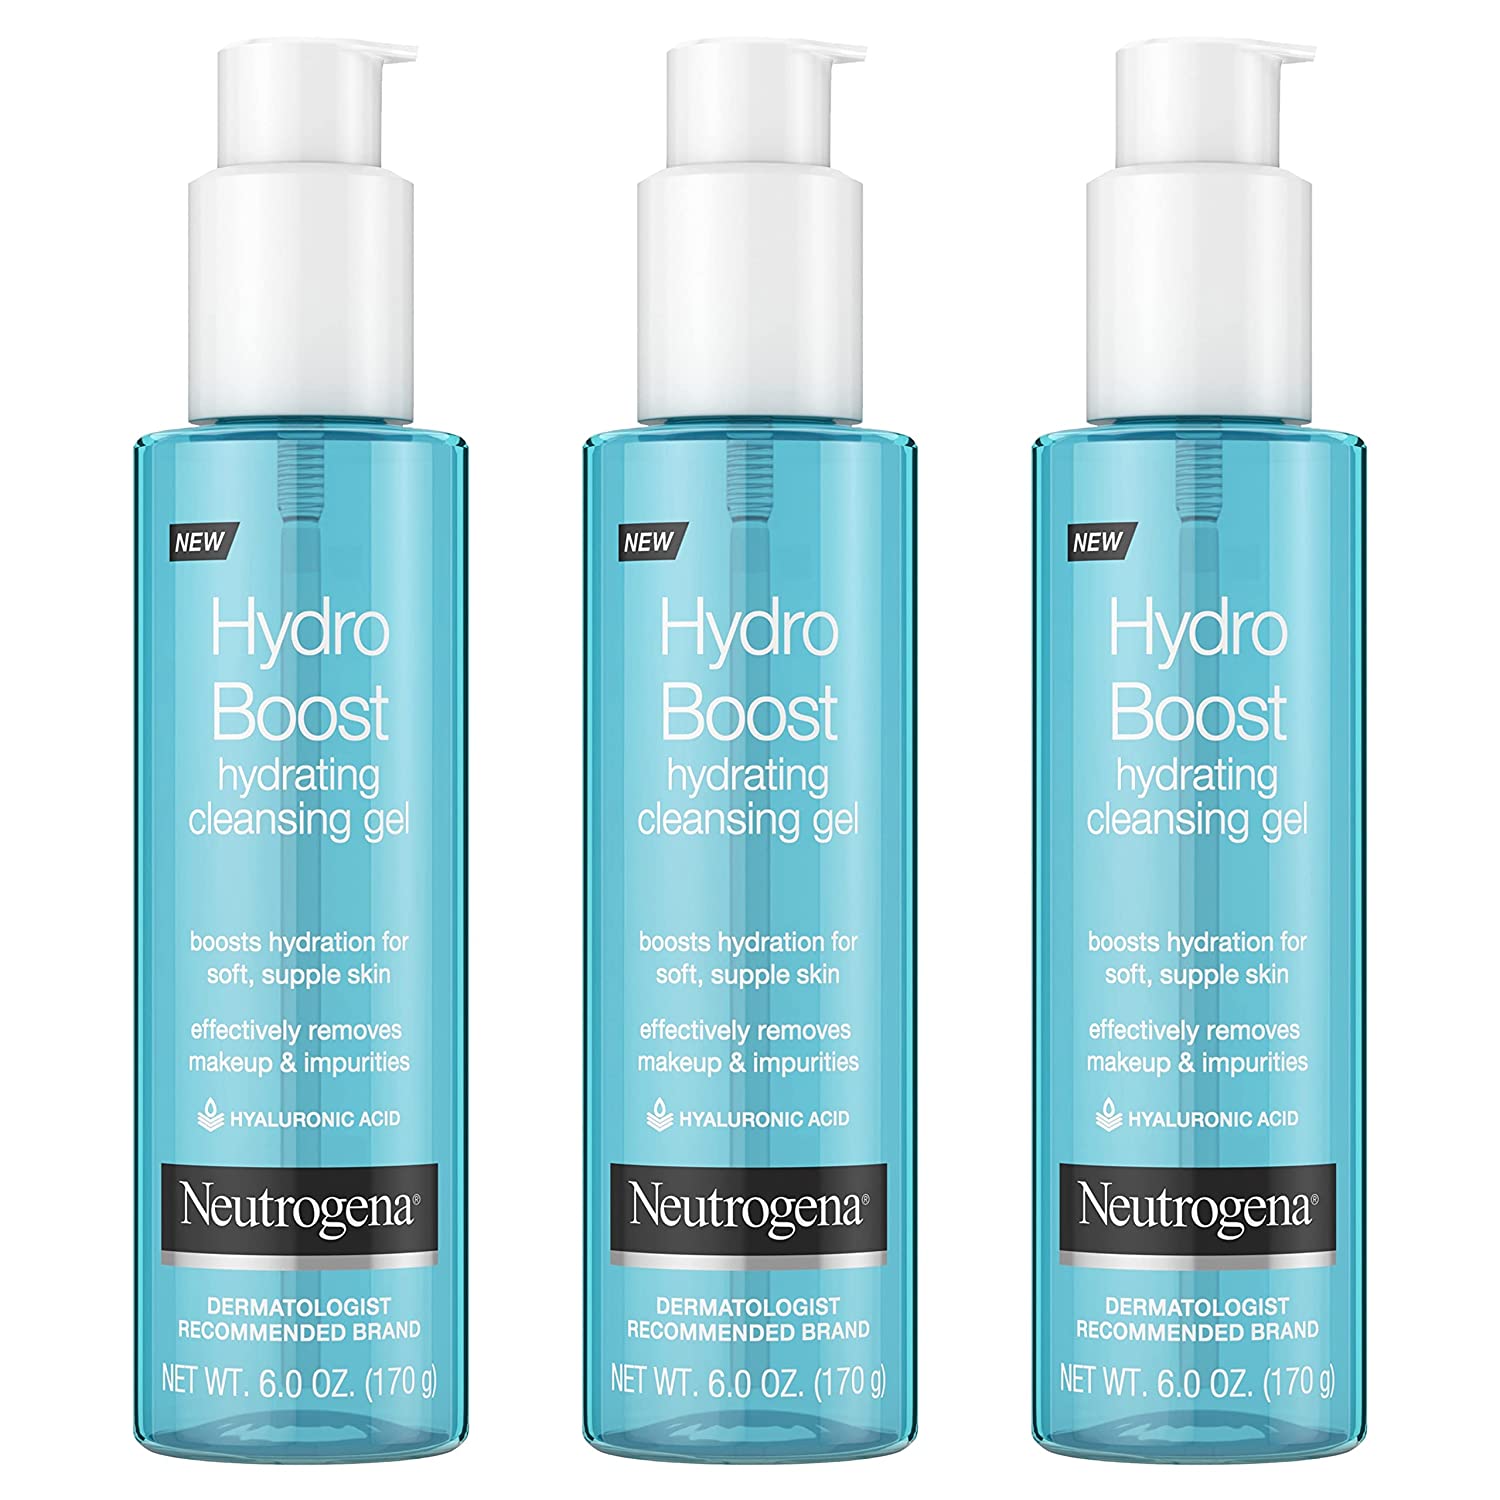 Neutrogena Hydro Boost Hydrating Gel Facial Cleanser & Makeup Remover Face Wash for Sensitive Skin, 6 oz